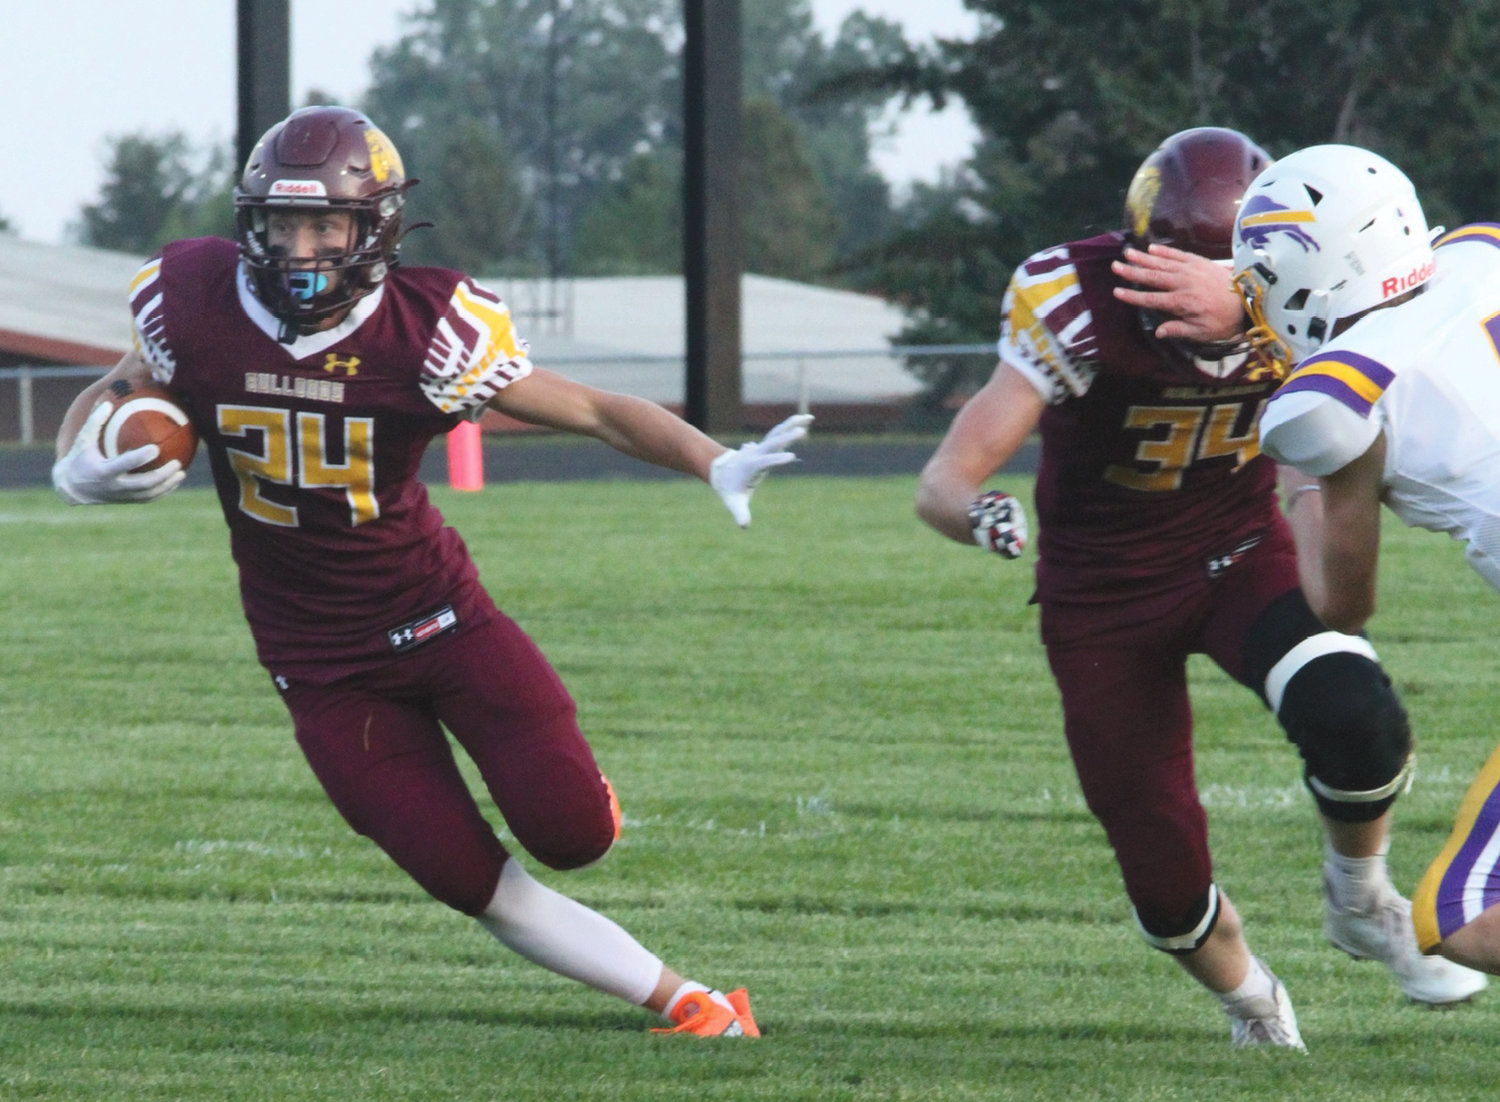 De Smet's Kadyn Fast (24) cuts inside a block by teammate Tucker Anderson (34) enroute to a 36-7 Bulldog victory over the Stanley County Buffalos Friday night at Wilkinson Field in De Smet.